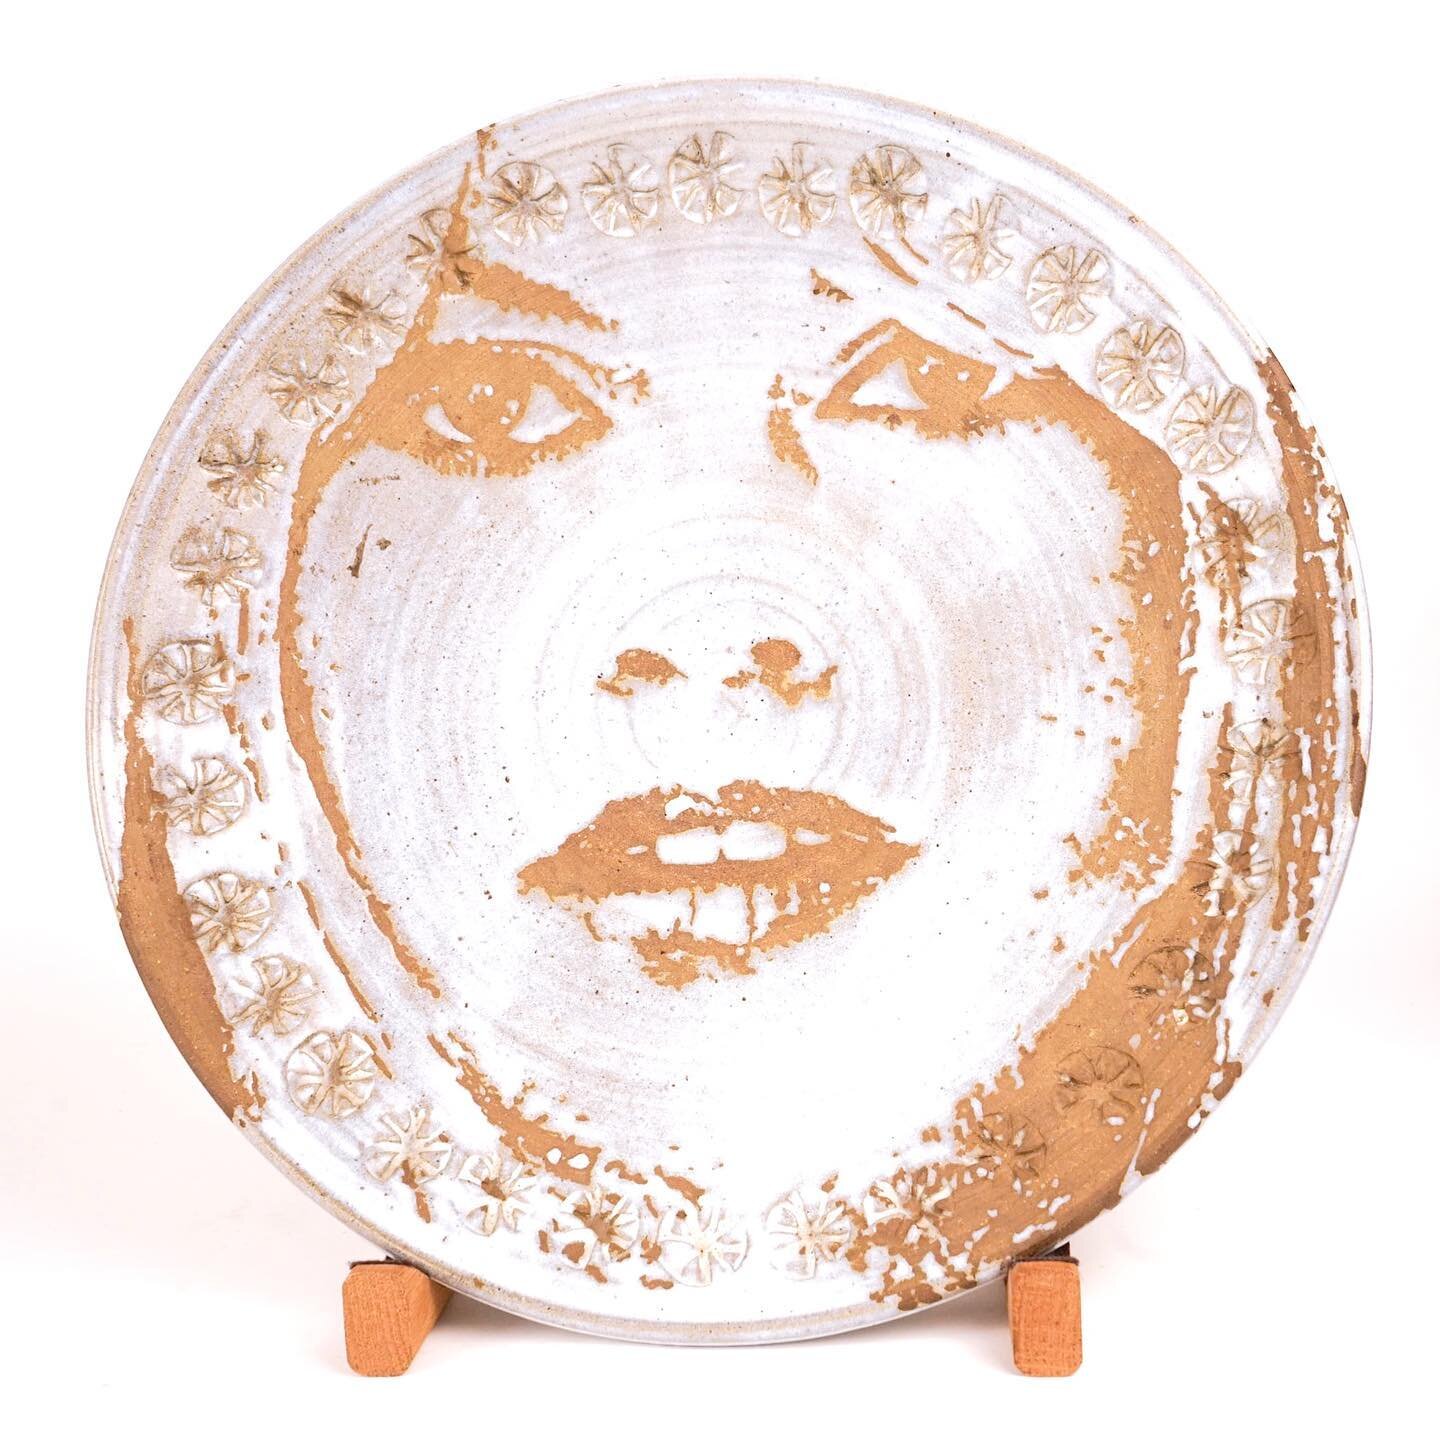 Robert Engle (1920-2009)
1960s-70s work. 
The large charger features Brigitte Bardot, and the vase is Marilyn Monroe.
He worked in these wonderful mediums of photographic transfer and resist on hand-thrown stoneware. 
Two terrific examples of Engle&r